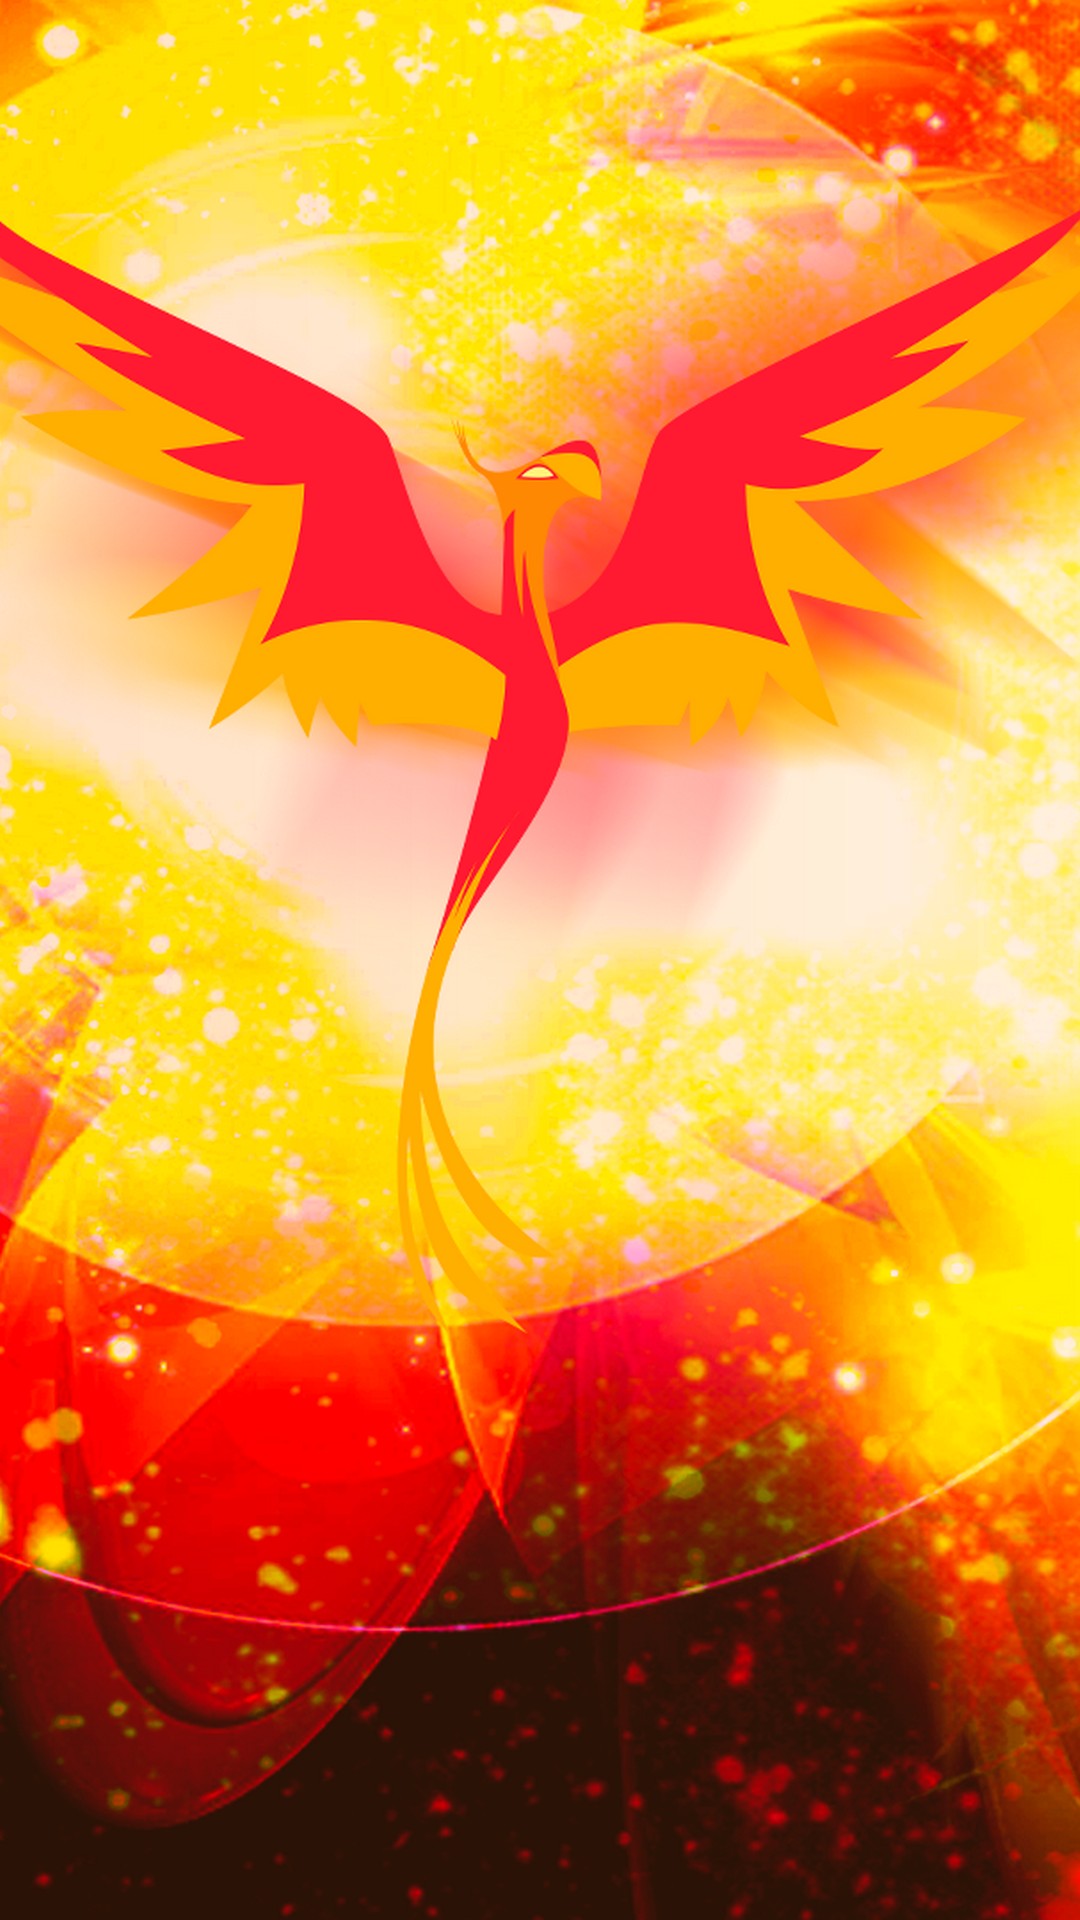 Phoenix iPhone Wallpaper with image resolution 1080x1920 pixel. You can make this wallpaper for your iPhone 5, 6, 7, 8, X backgrounds, Mobile Screensaver, or iPad Lock Screen